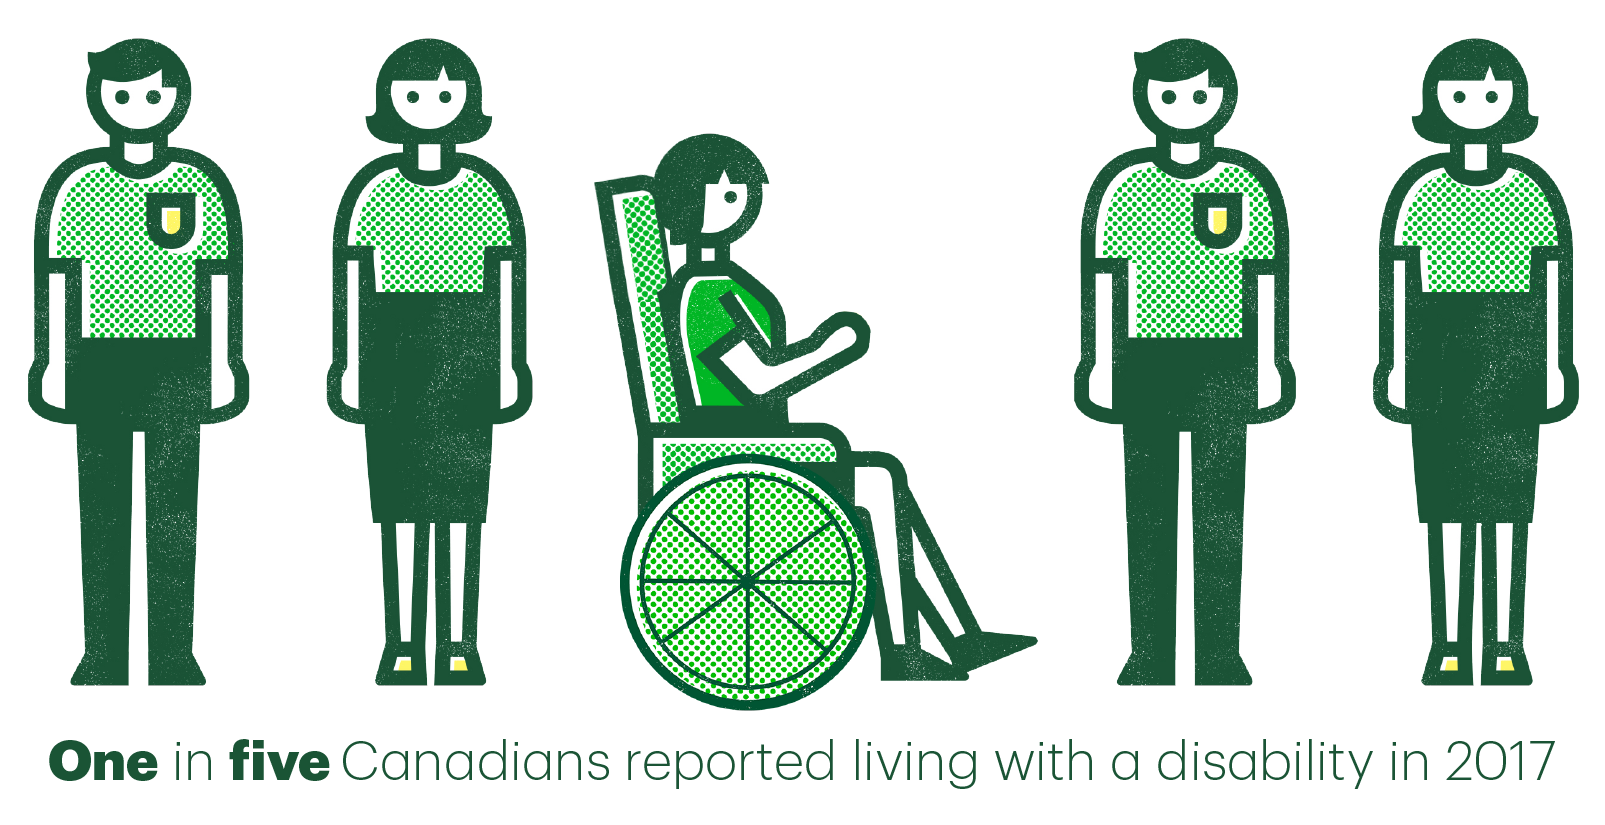 One in five Canadians reported living with a disability in 2017.